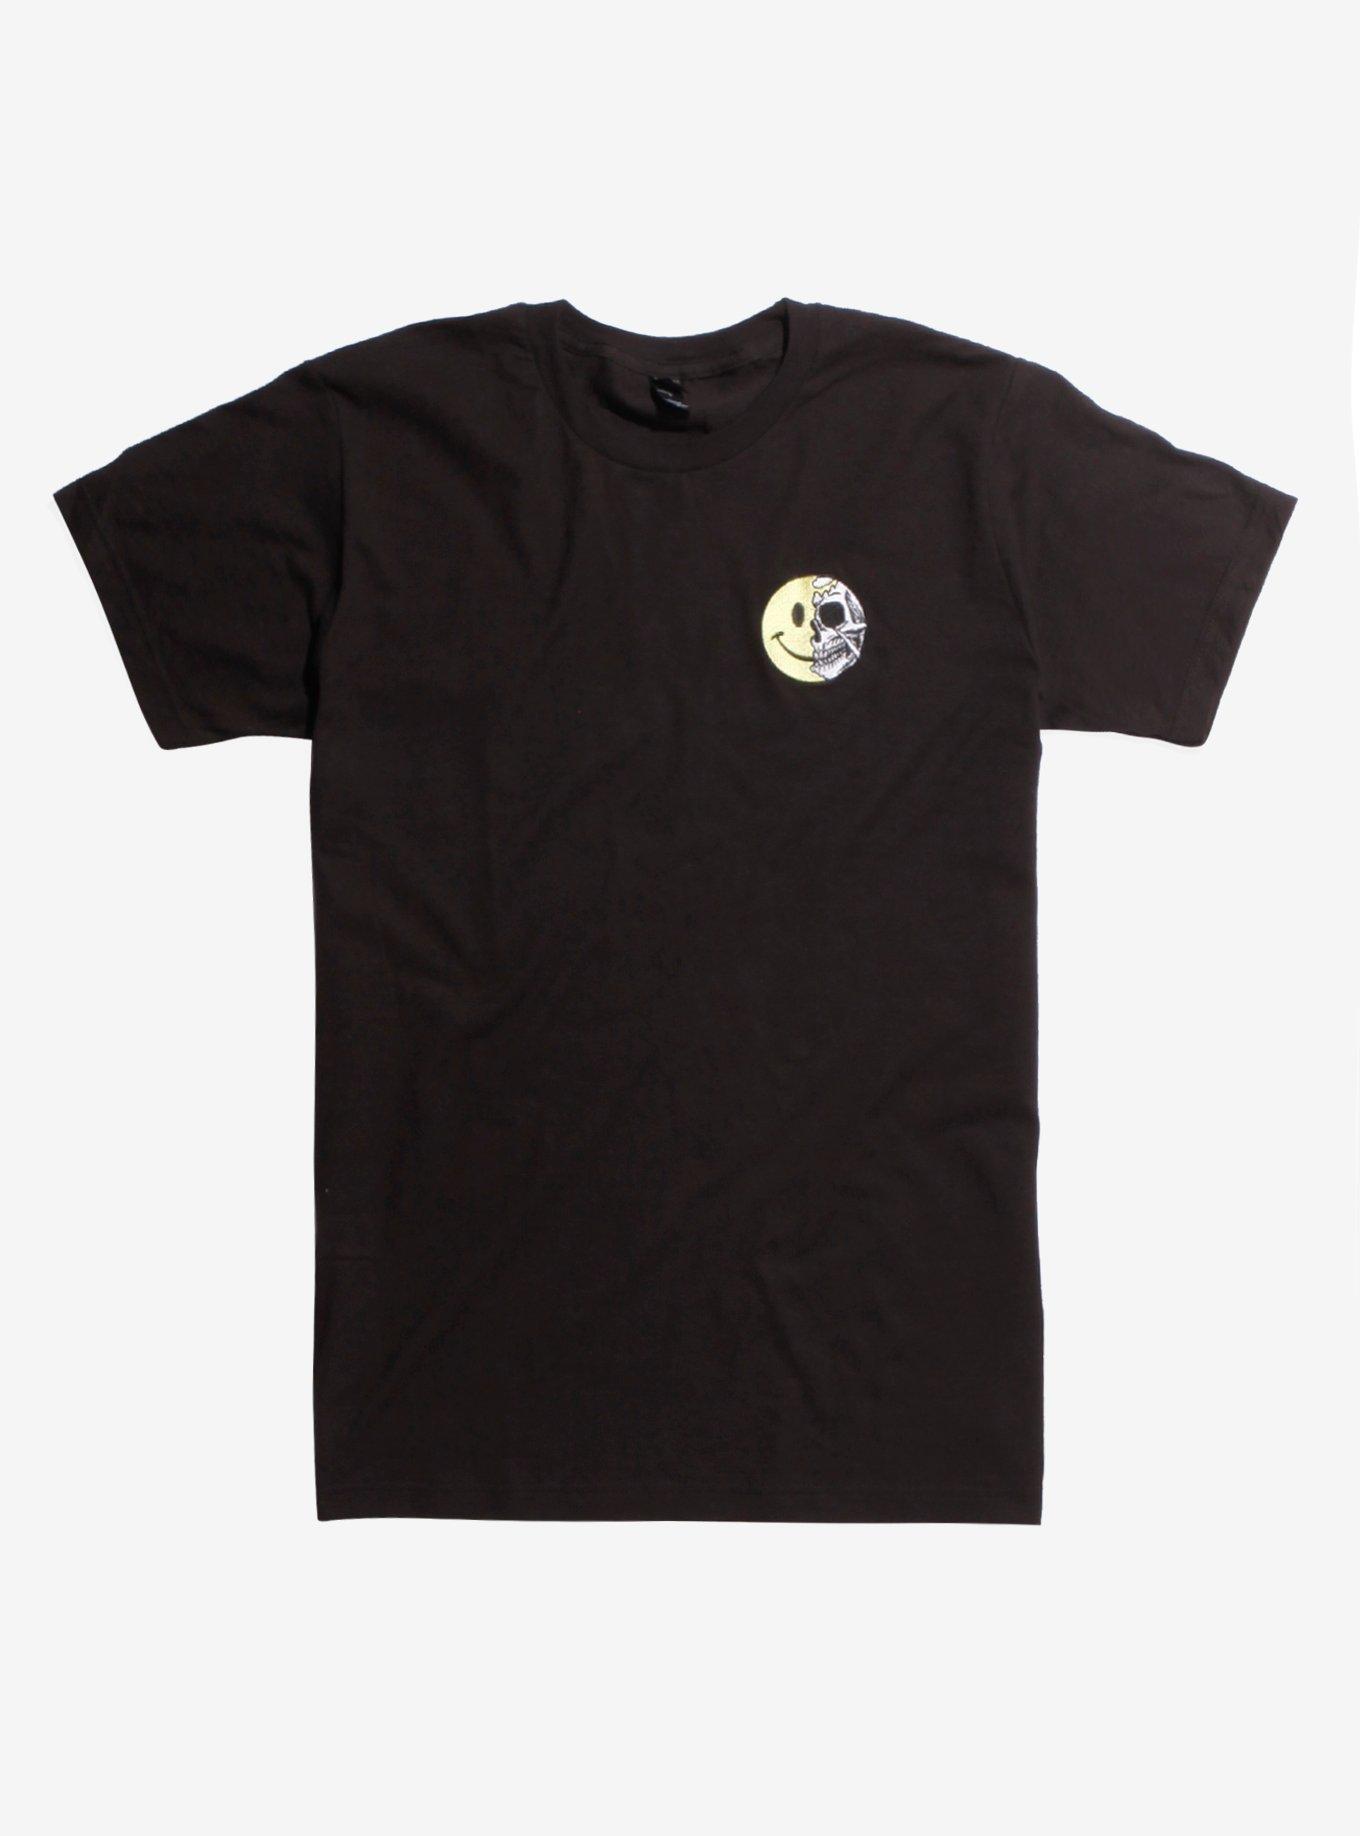 Smiley Skull Embroidered T-Shirt | Hot Topic